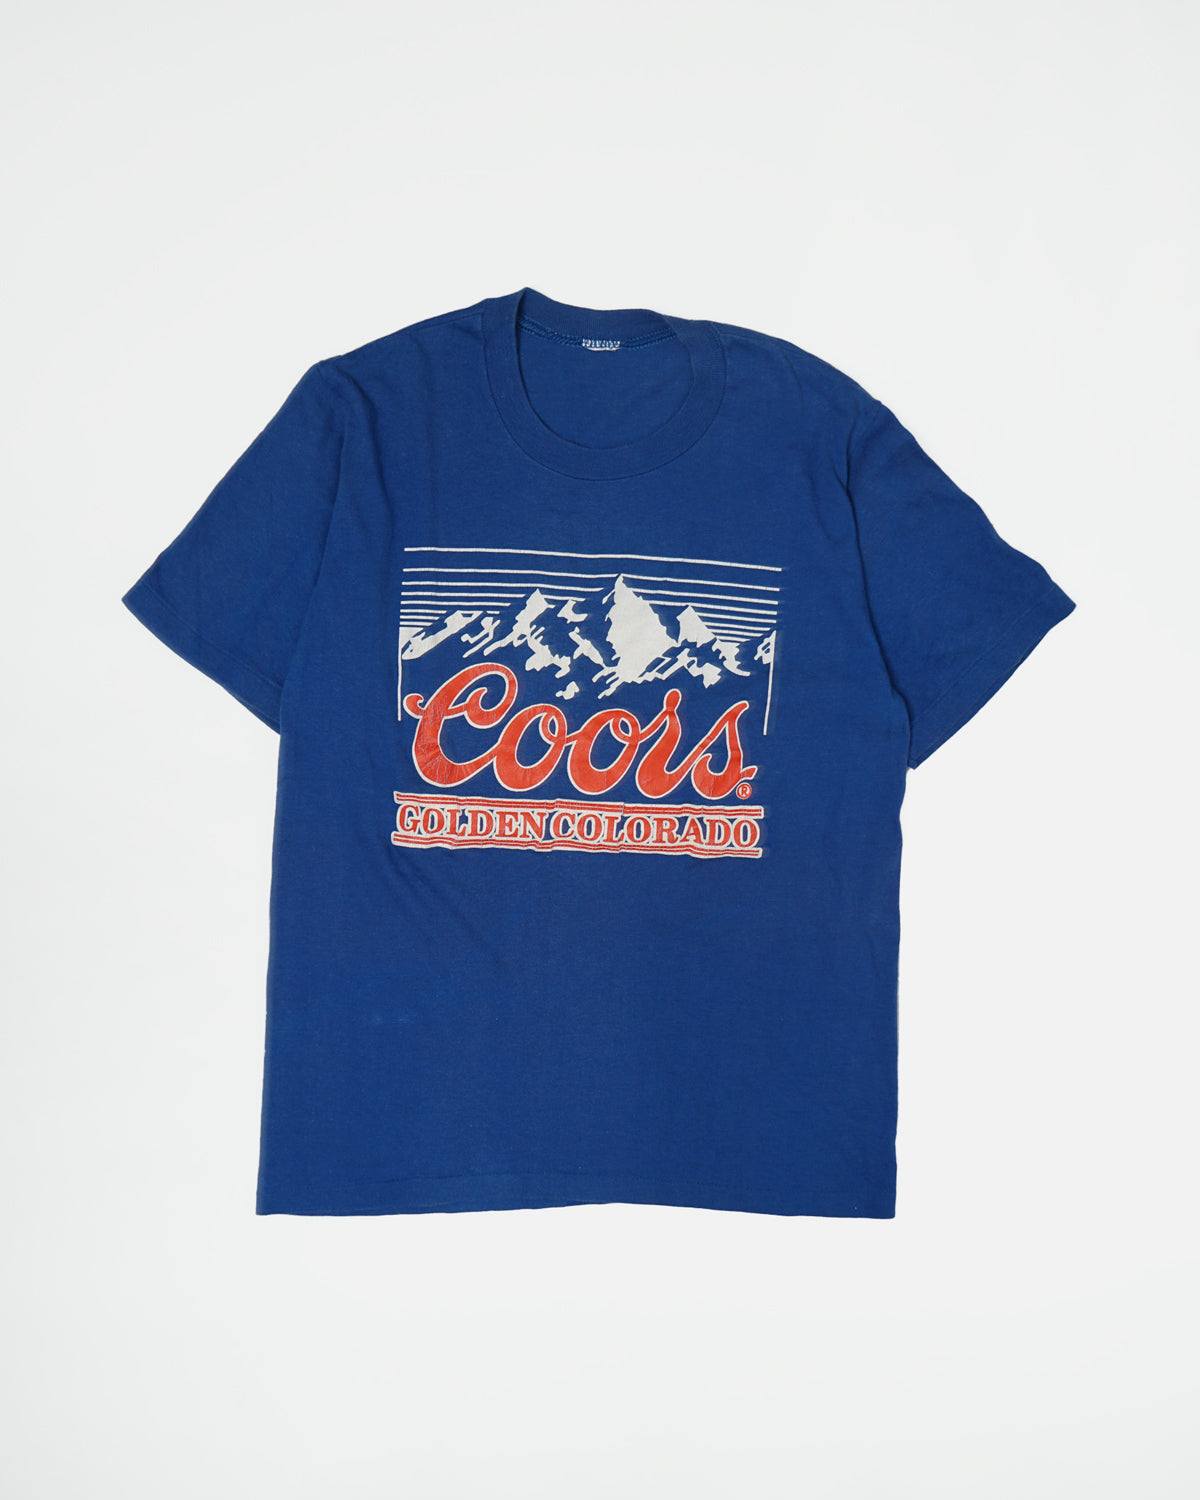 Graphic Tee / Coors